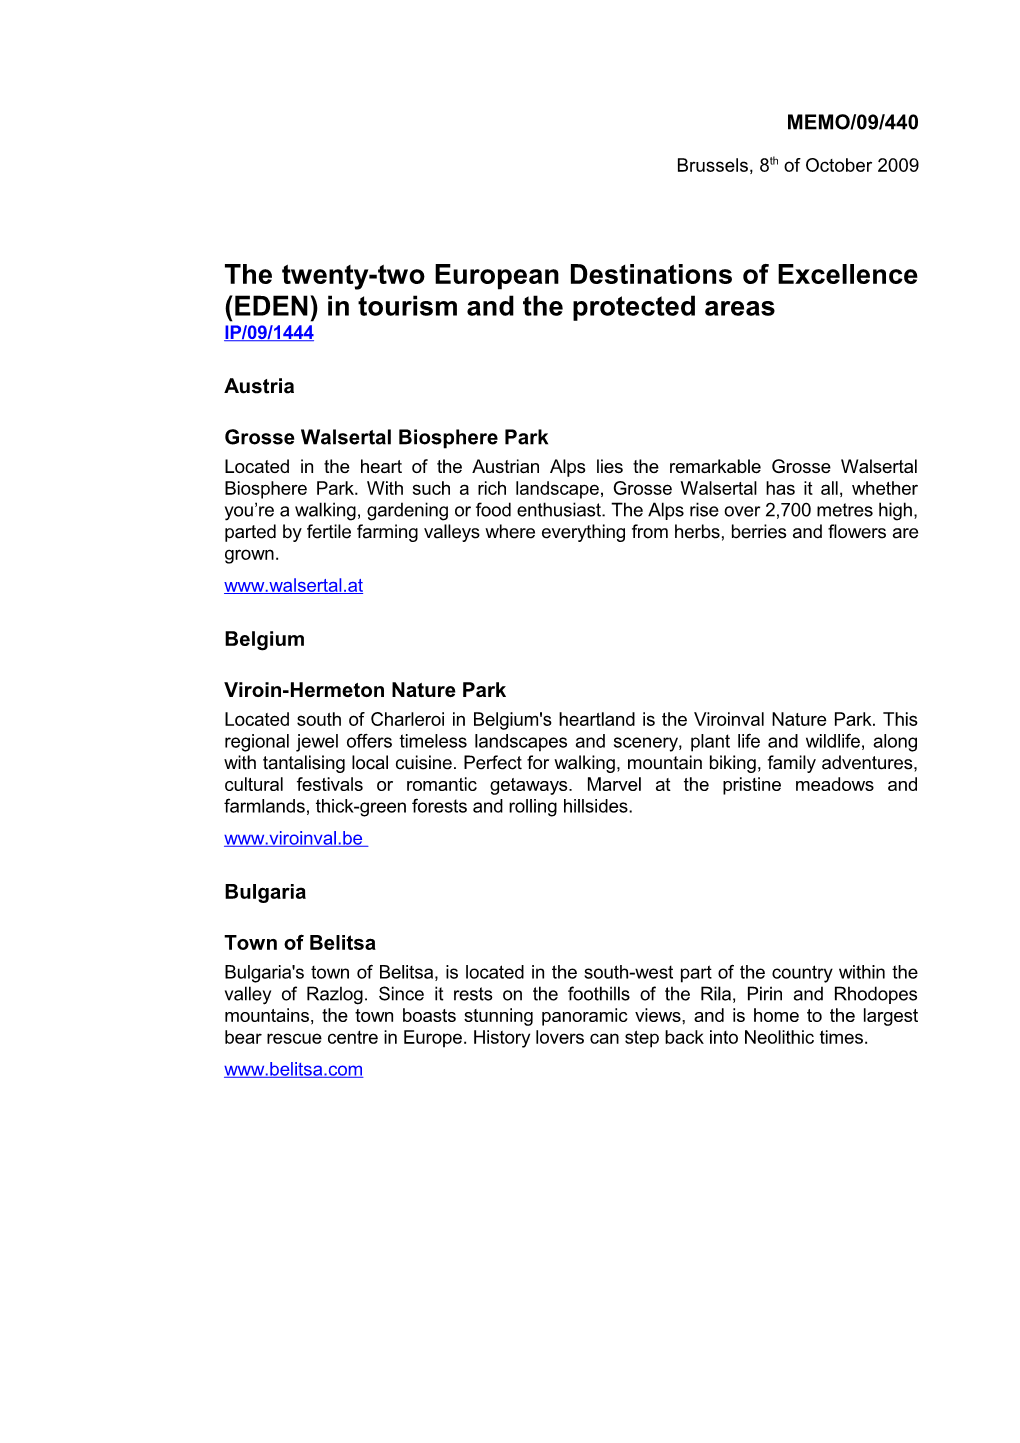 The Twenty-Two European Destinations of Excellence (EDEN) in Tourism and the Protected Areas